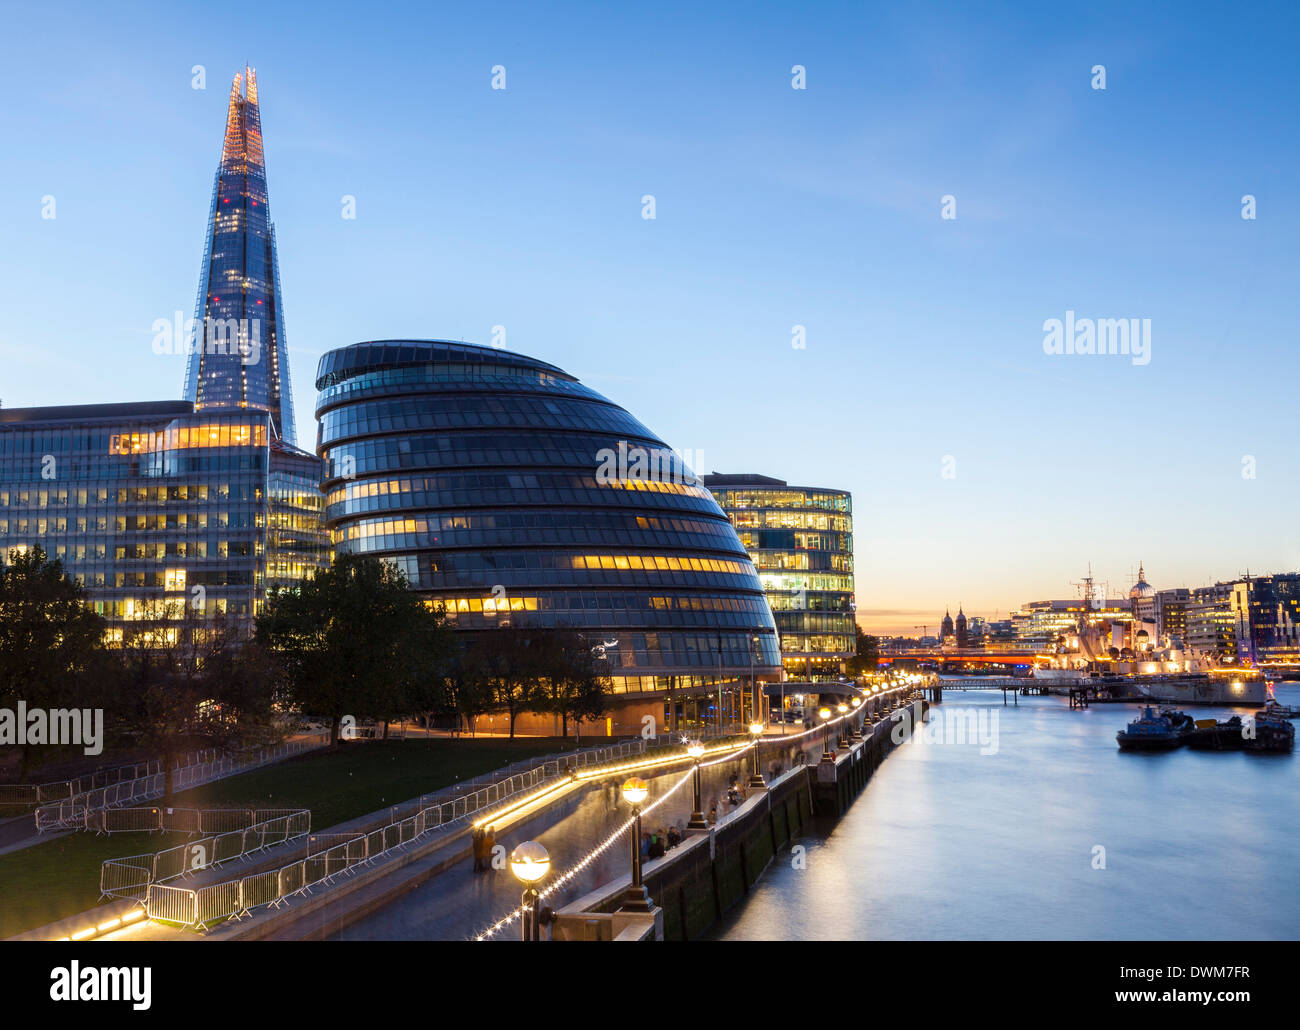 London skyline at dusk including the GLC building, HMS Belfast and the Shard, taken from Tower Bridge, London, England, UK Stock Photo